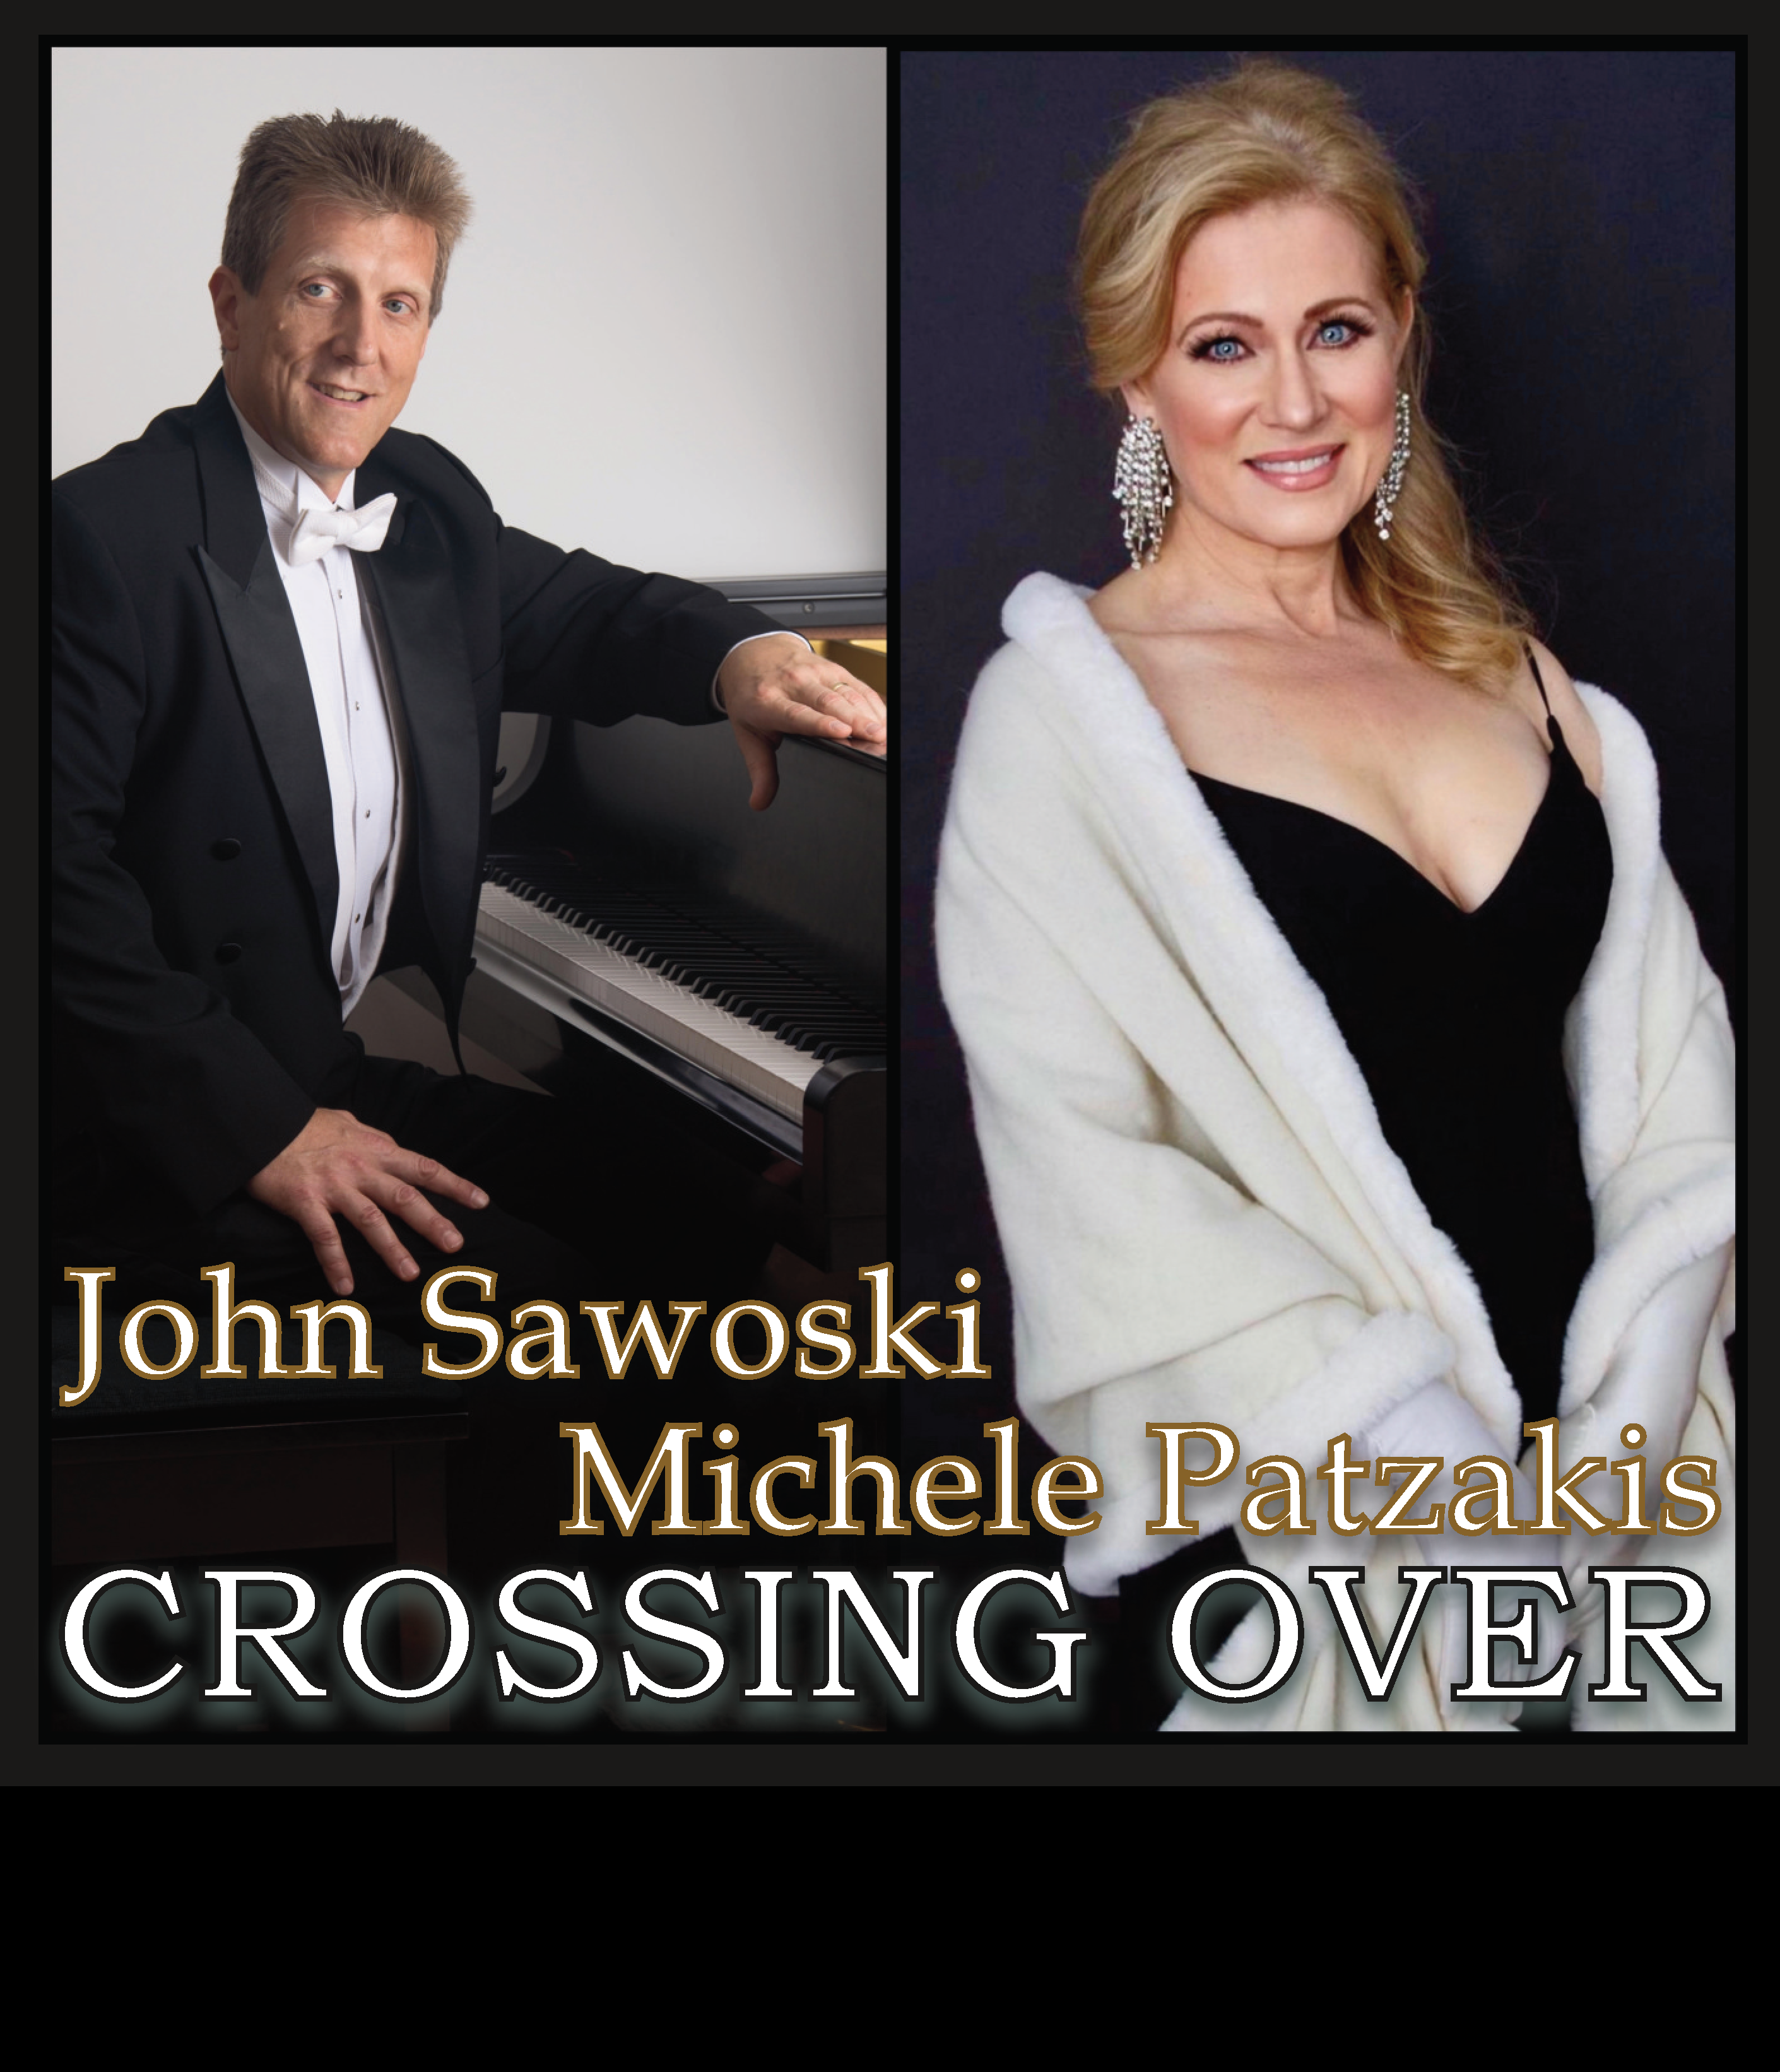 Michele Patzakis and John Sawoski’s New EP “Crossing Over” Released